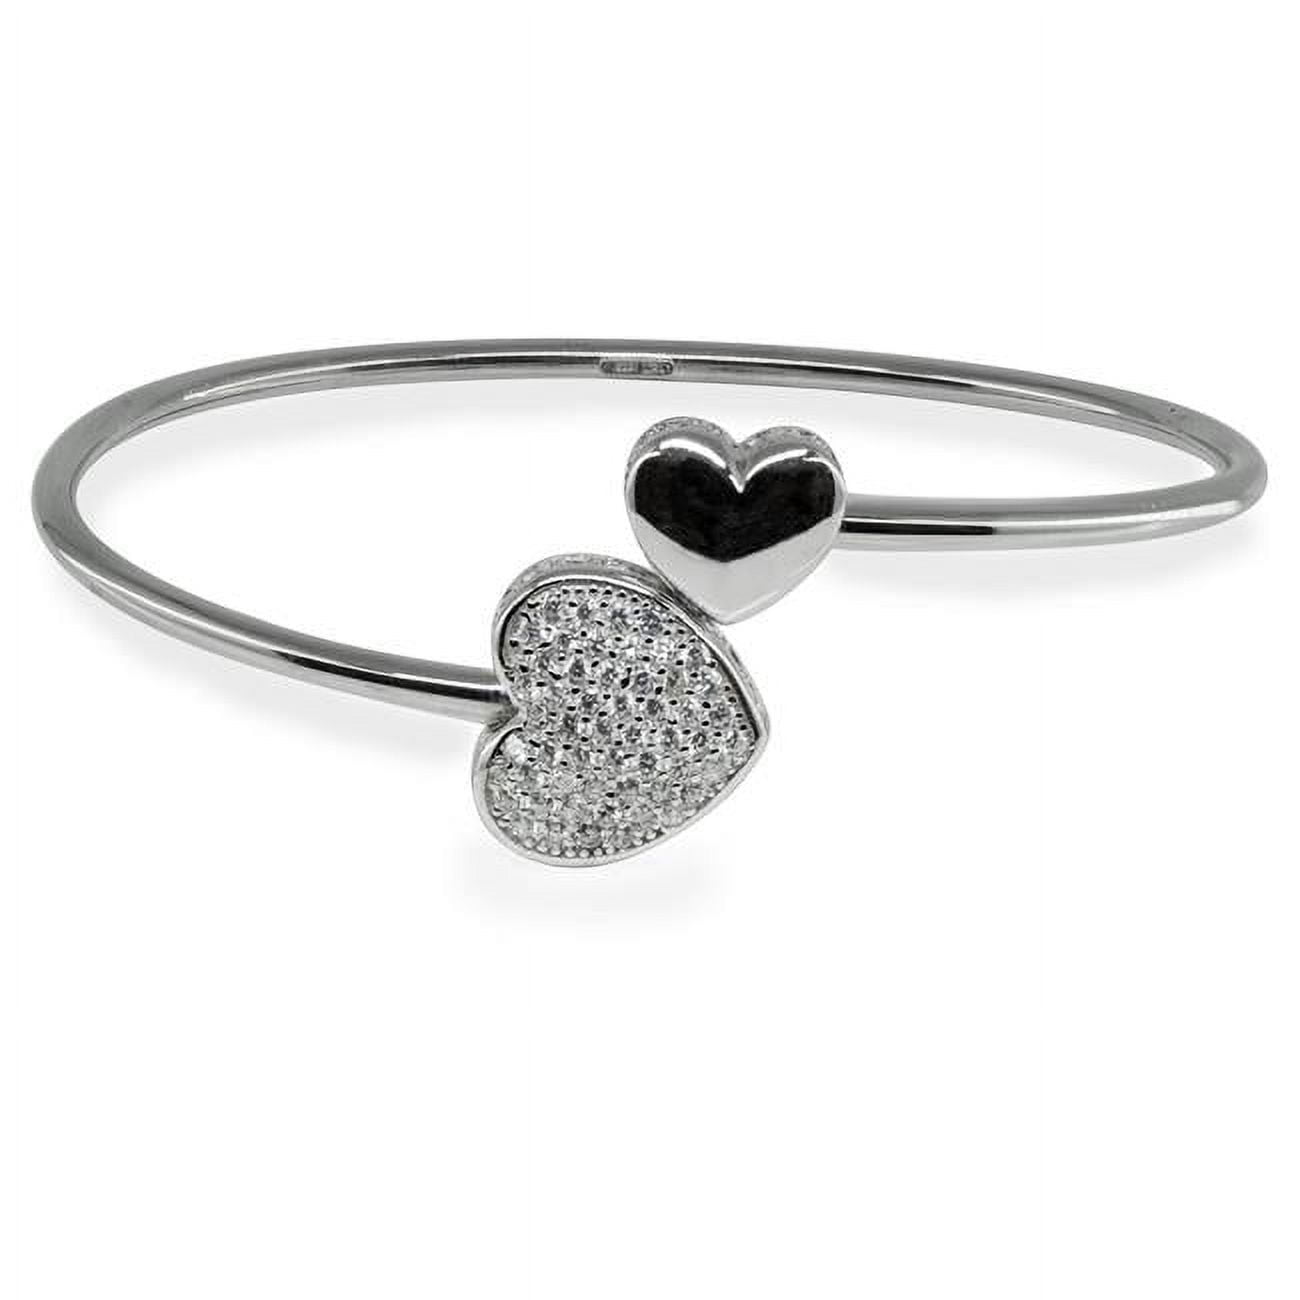 122137 Sparkling Cz Heart Cuff Bangle In Sterling Silver